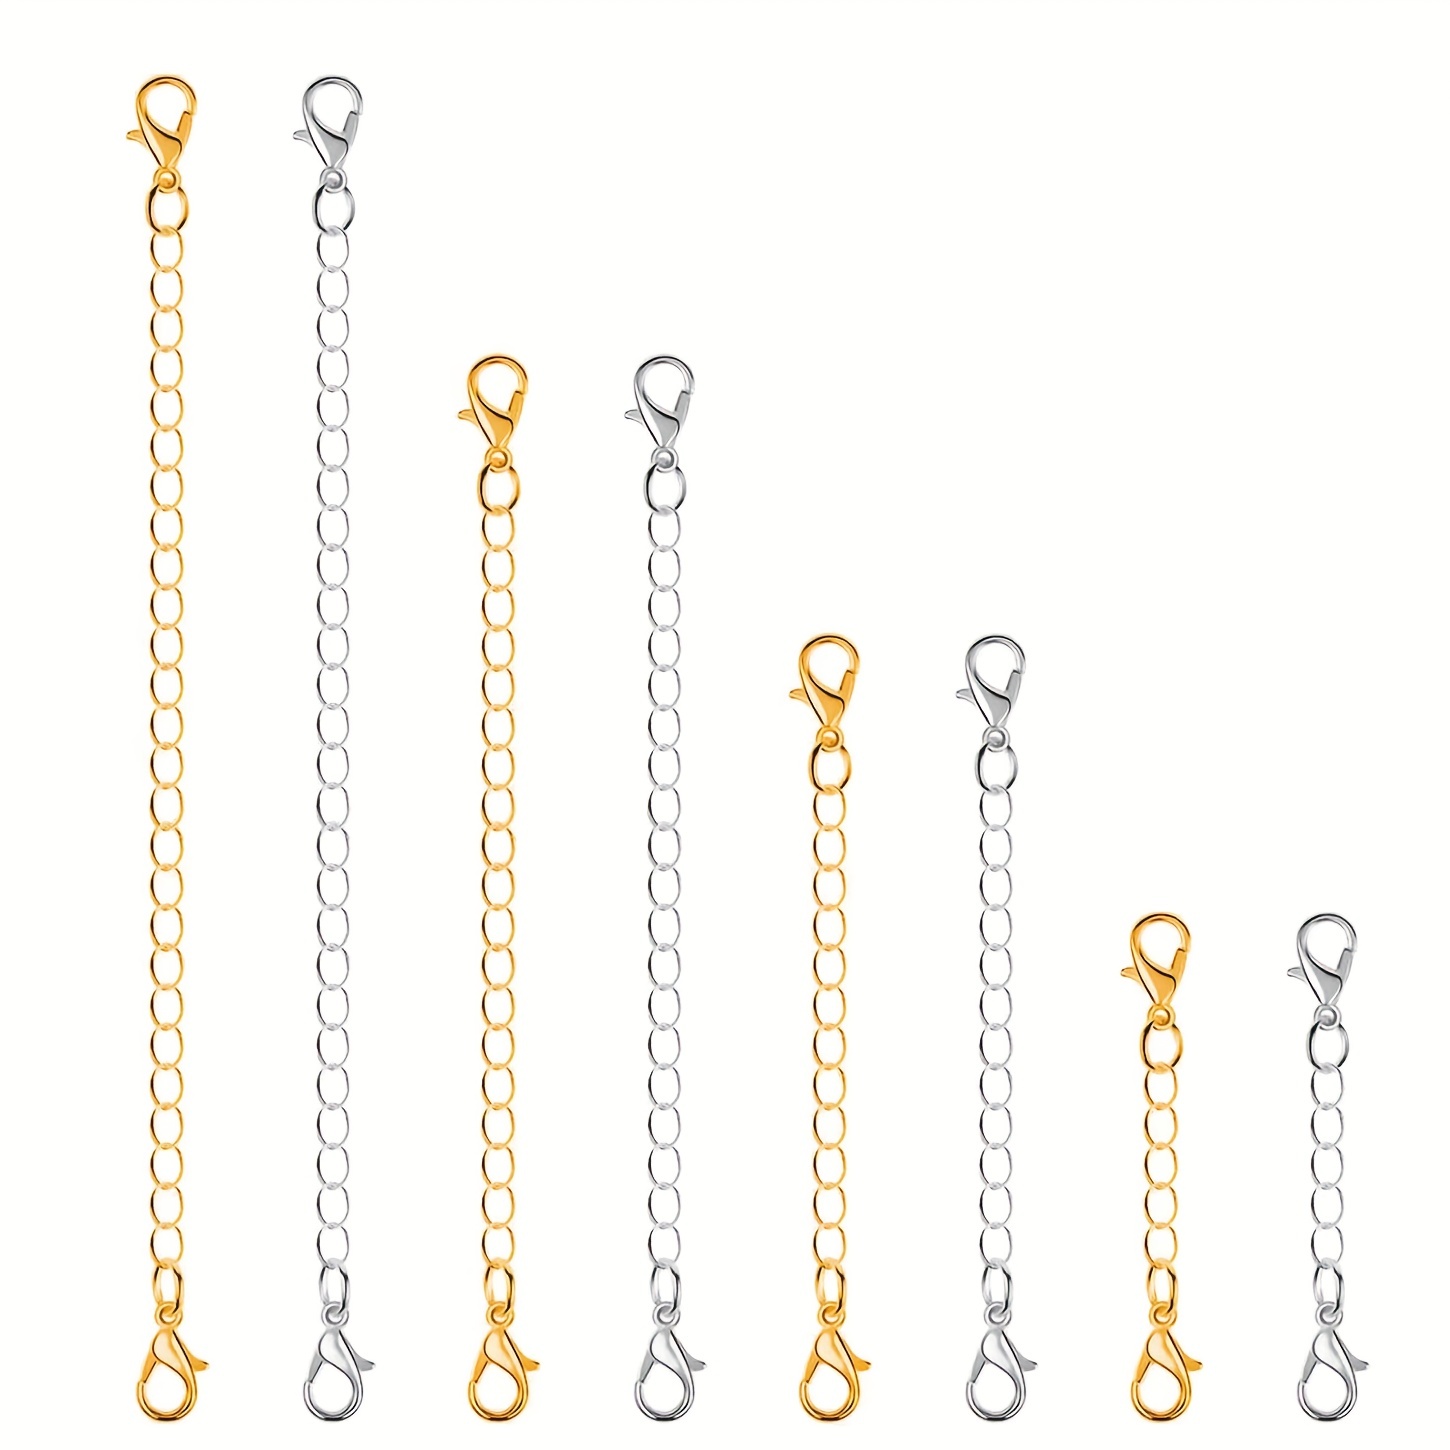 Golden Silvery Stainless Steel Necklace Extenders Chain - Temu